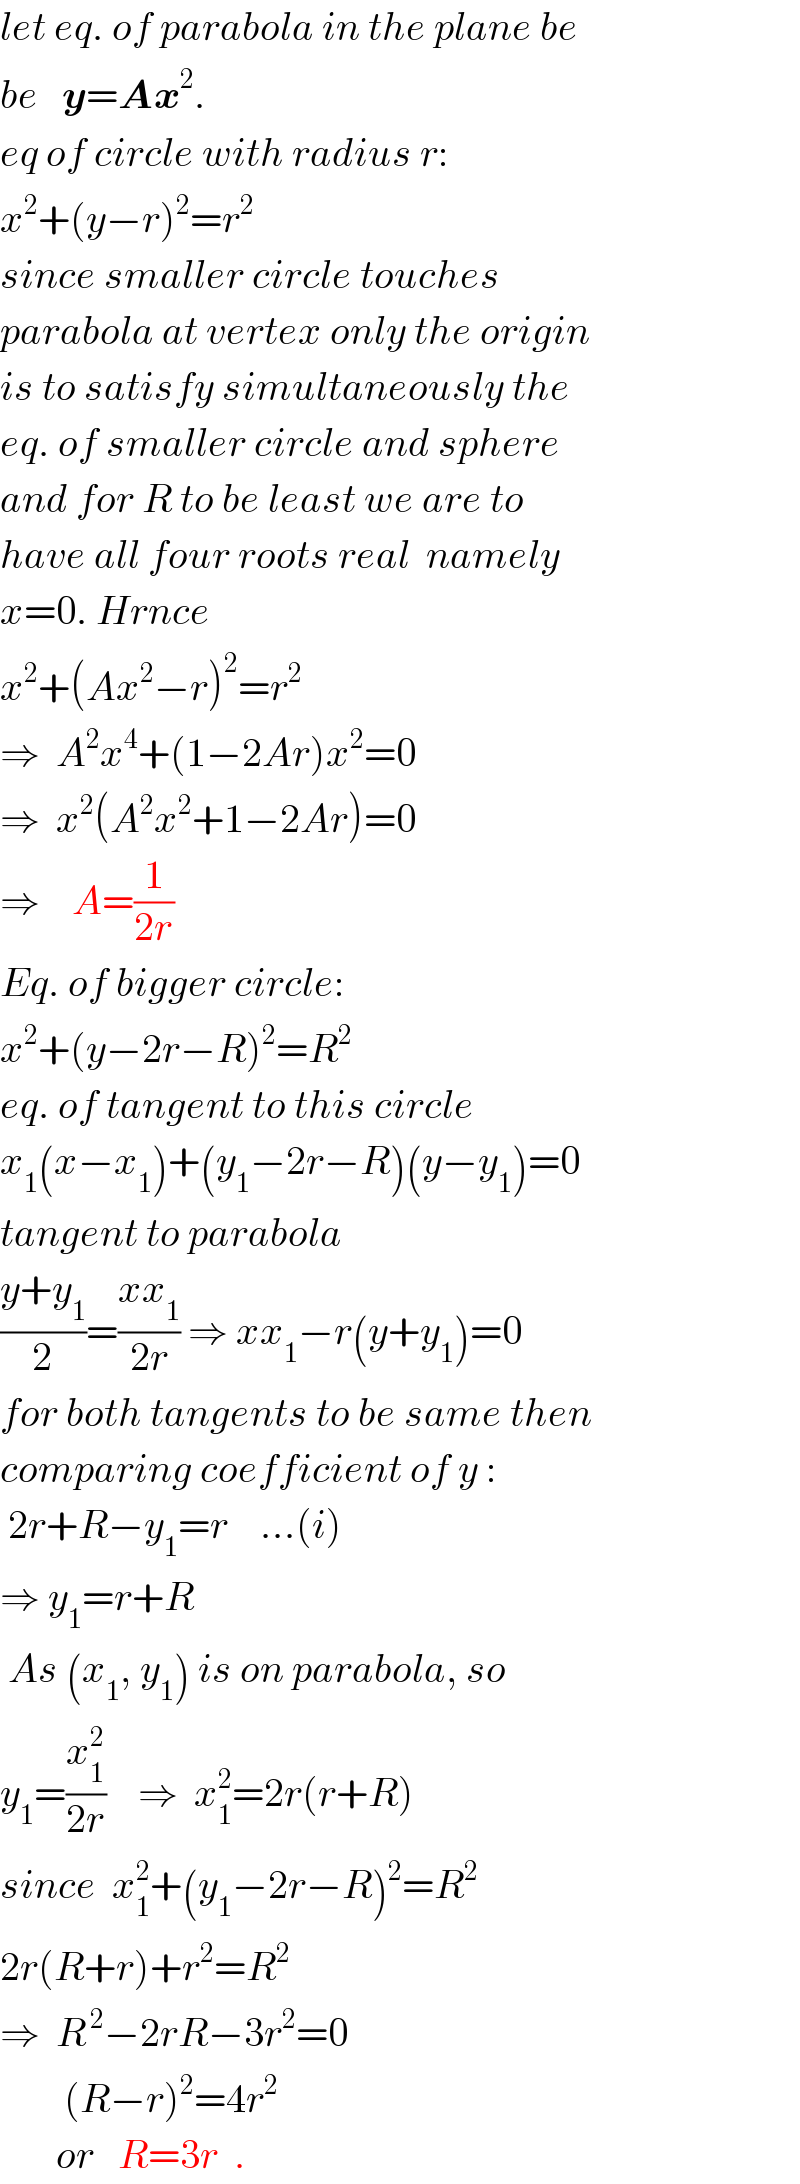 let eq. of parabola in the plane be  be   y=Ax^2 .  eq of circle with radius r:  x^2 +(y−r)^2 =r^2     since smaller circle touches  parabola at vertex only the origin  is to satisfy simultaneously the  eq. of smaller circle and sphere  and for R to be least we are to  have all four roots real  namely  x=0. Hrnce  x^2 +(Ax^2 −r)^2 =r^2   ⇒  A^2 x^4 +(1−2Ar)x^2 =0  ⇒  x^2 (A^2 x^2 +1−2Ar)=0  ⇒    A=(1/(2r))  Eq. of bigger circle:  x^2 +(y−2r−R)^2 =R^2   eq. of tangent to this circle  x_1 (x−x_1 )+(y_1 −2r−R)(y−y_1 )=0  tangent to parabola  ((y+y_1 )/2)=((xx_1 )/(2r)) ⇒ xx_1 −r(y+y_1 )=0  for both tangents to be same then  comparing coefficient of y :   2r+R−y_1 =r    ...(i)  ⇒ y_1 =r+R   As (x_1 , y_1 ) is on parabola, so  y_1 =(x_1 ^2 /(2r))    ⇒  x_1 ^2 =2r(r+R)  since  x_1 ^2 +(y_1 −2r−R)^2 =R^2   2r(R+r)+r^2 =R^2   ⇒  R^( 2) −2rR−3r^2 =0          (R−r)^2 =4r^2          or   R=3r  .  